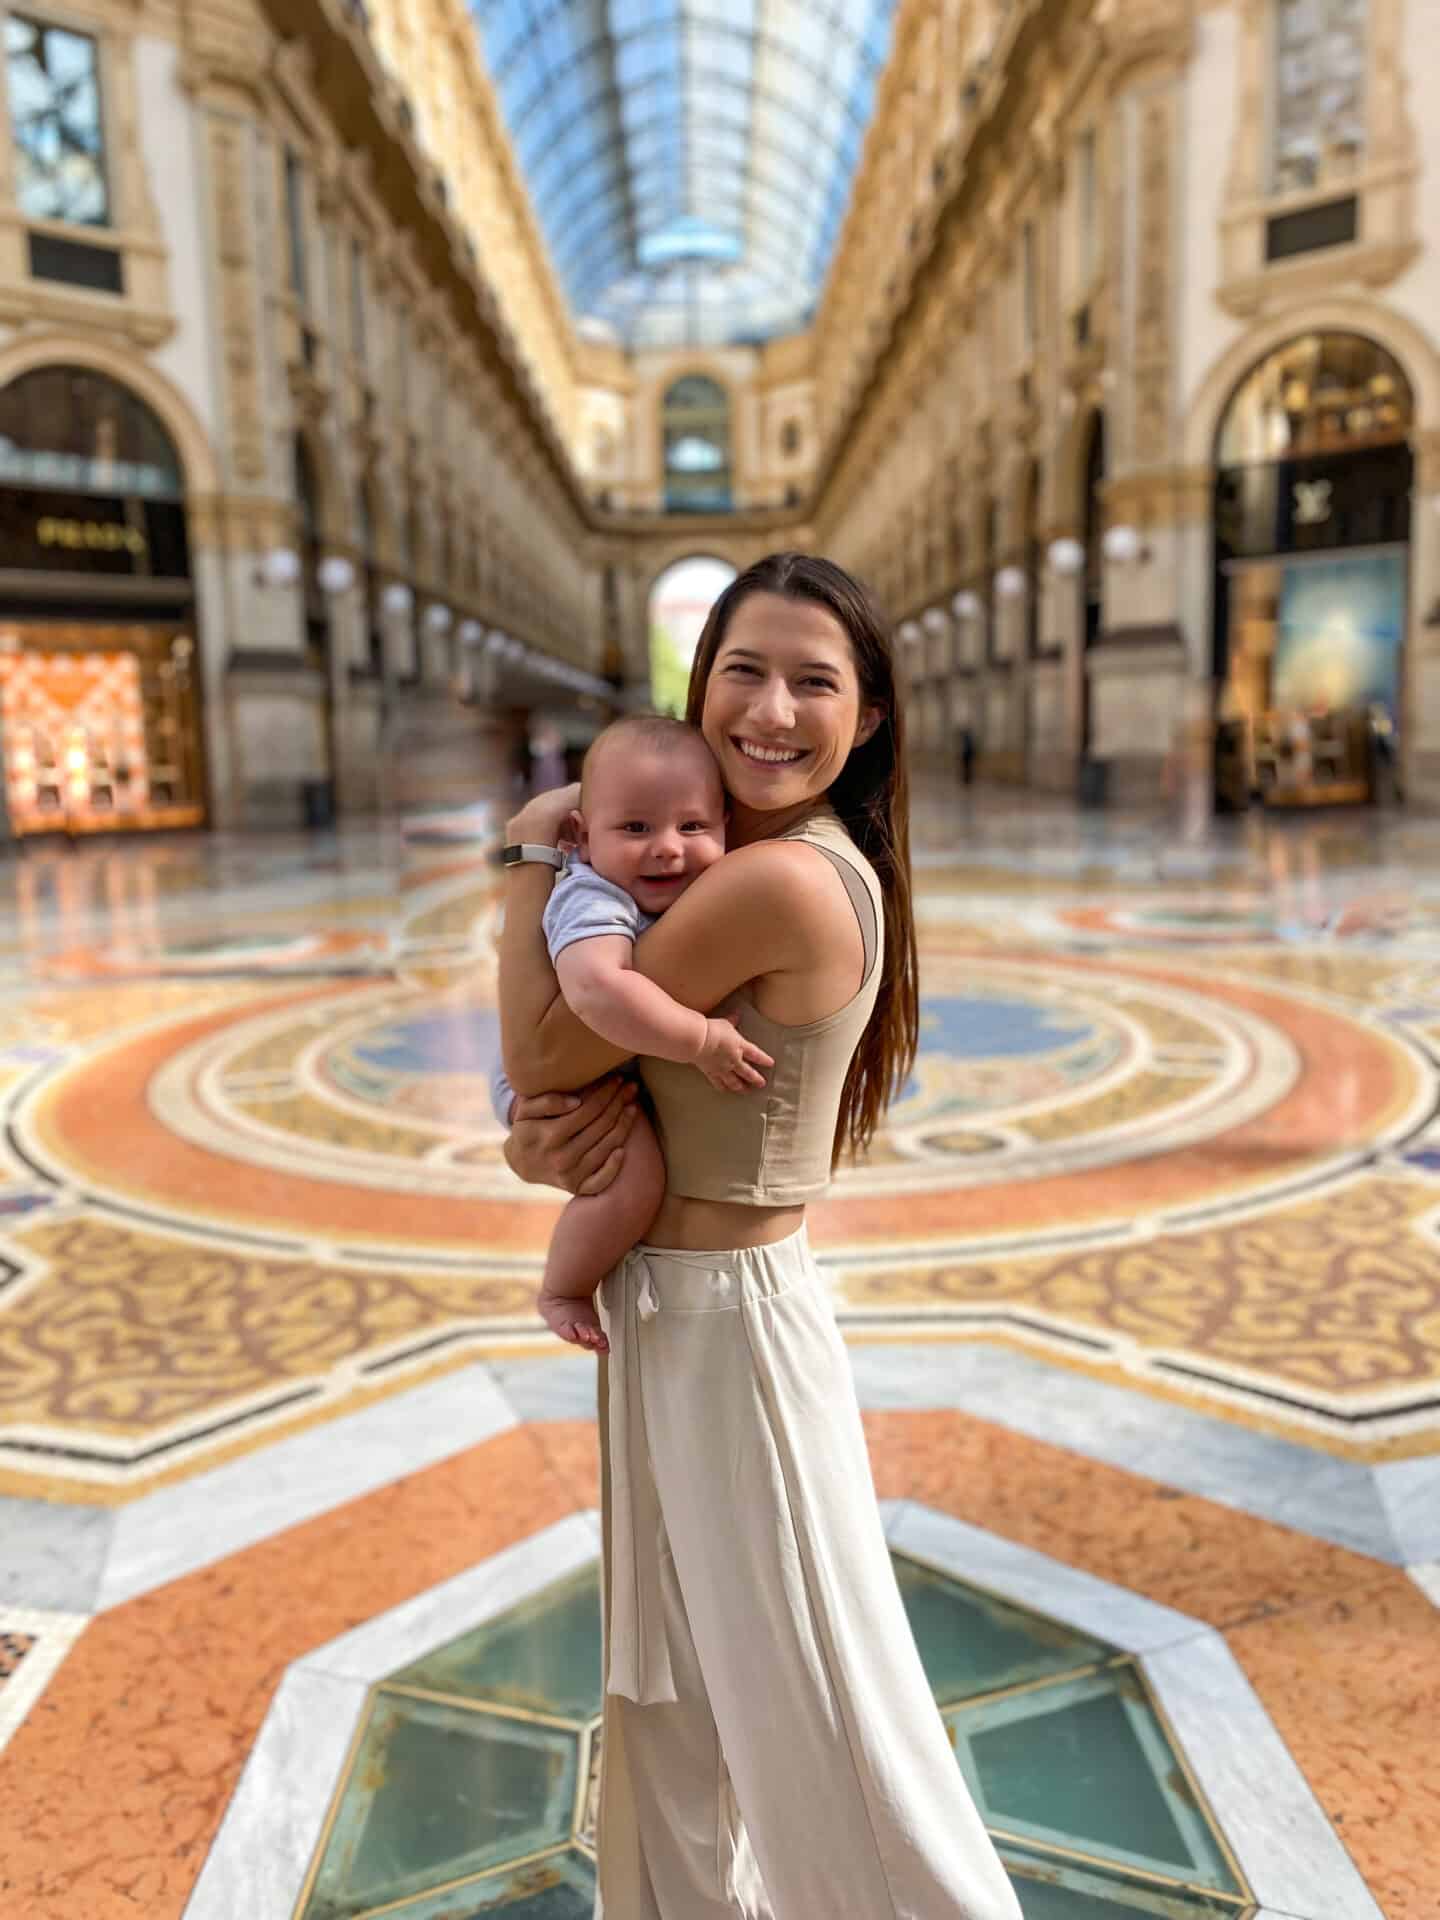 mother and smiling 6 month old baby at Galleria early in the morning in milan